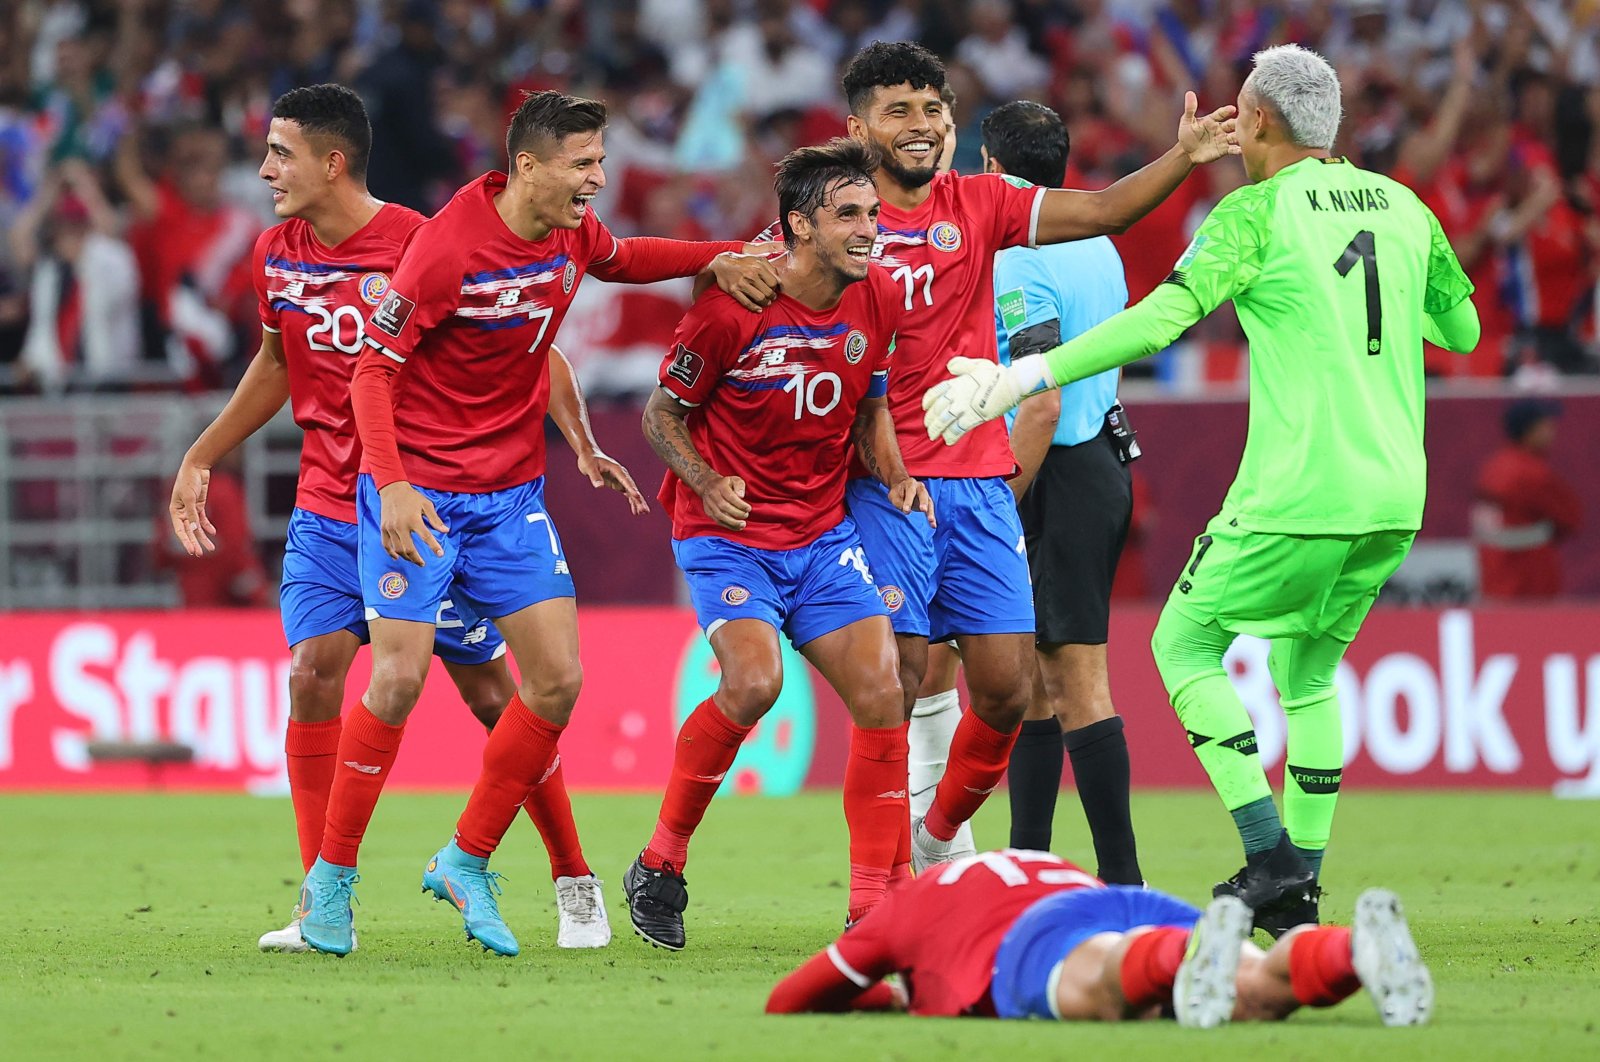 Costa Rica players celebrate their win in the FIFA World Cup 2022 inter-confederation playoffs match against New Zealand, Al Rayyan, Doha, June 14, 2022. (AFP Photo)